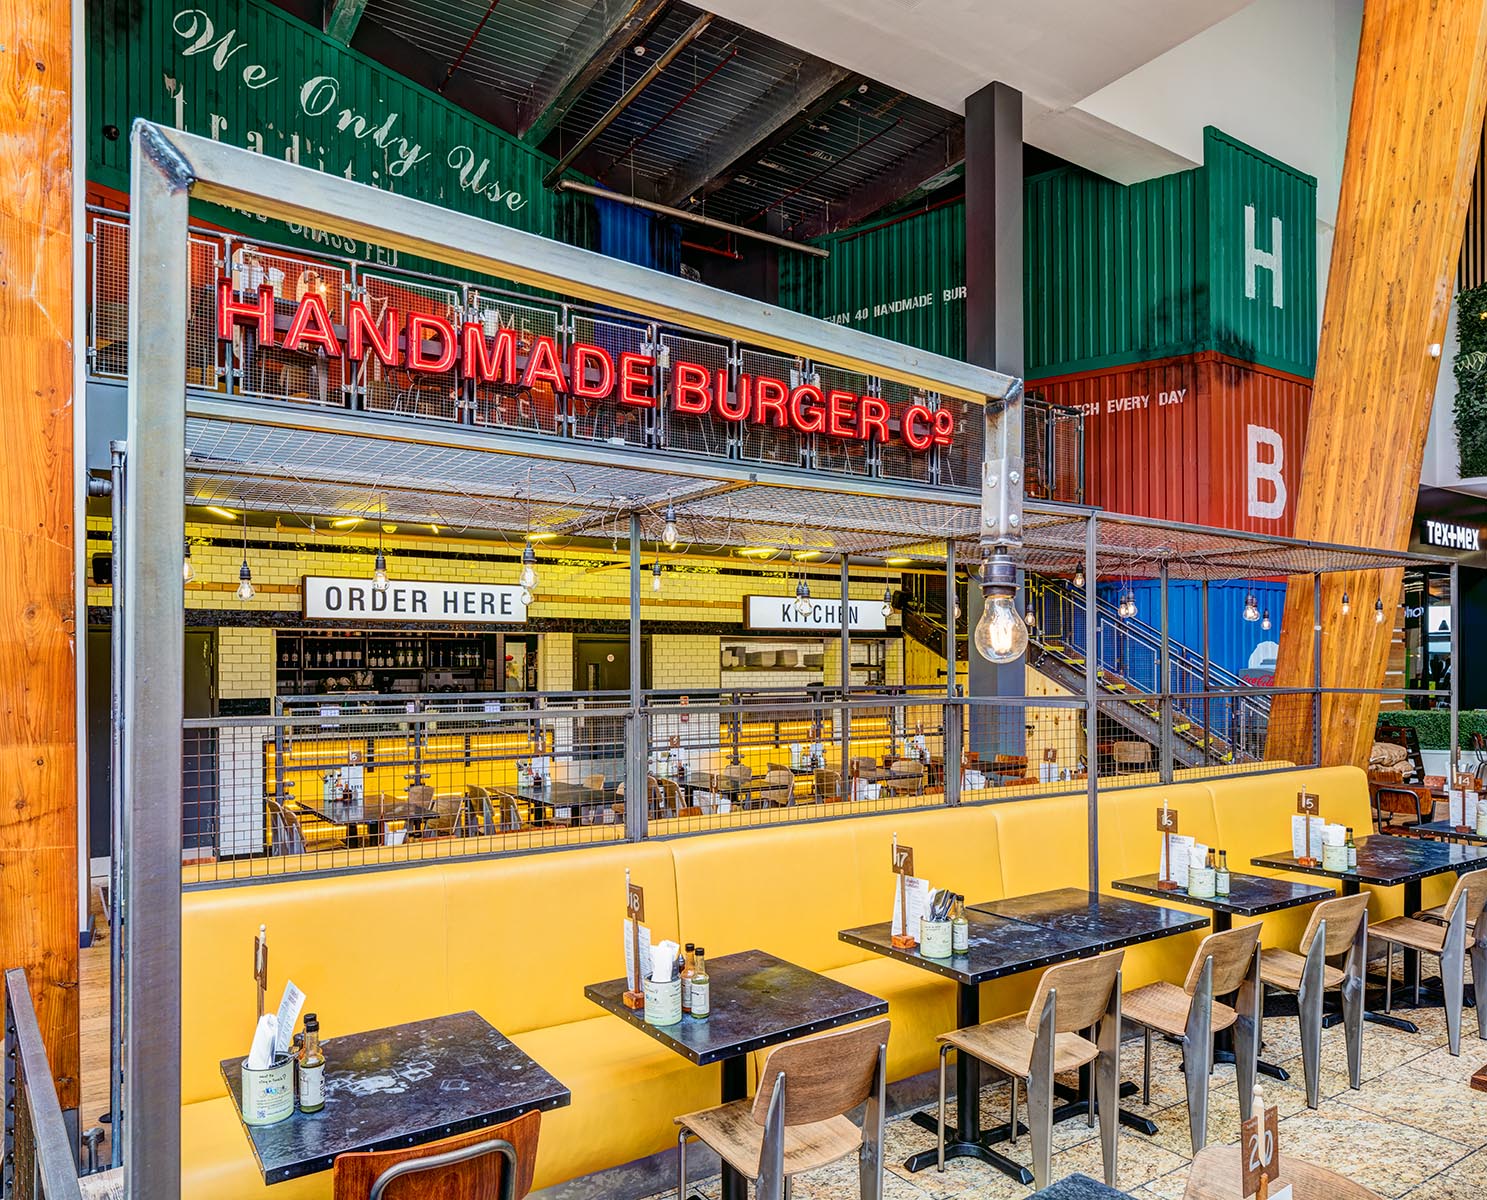 Design concept for high street burger chainClient: Brown Studio